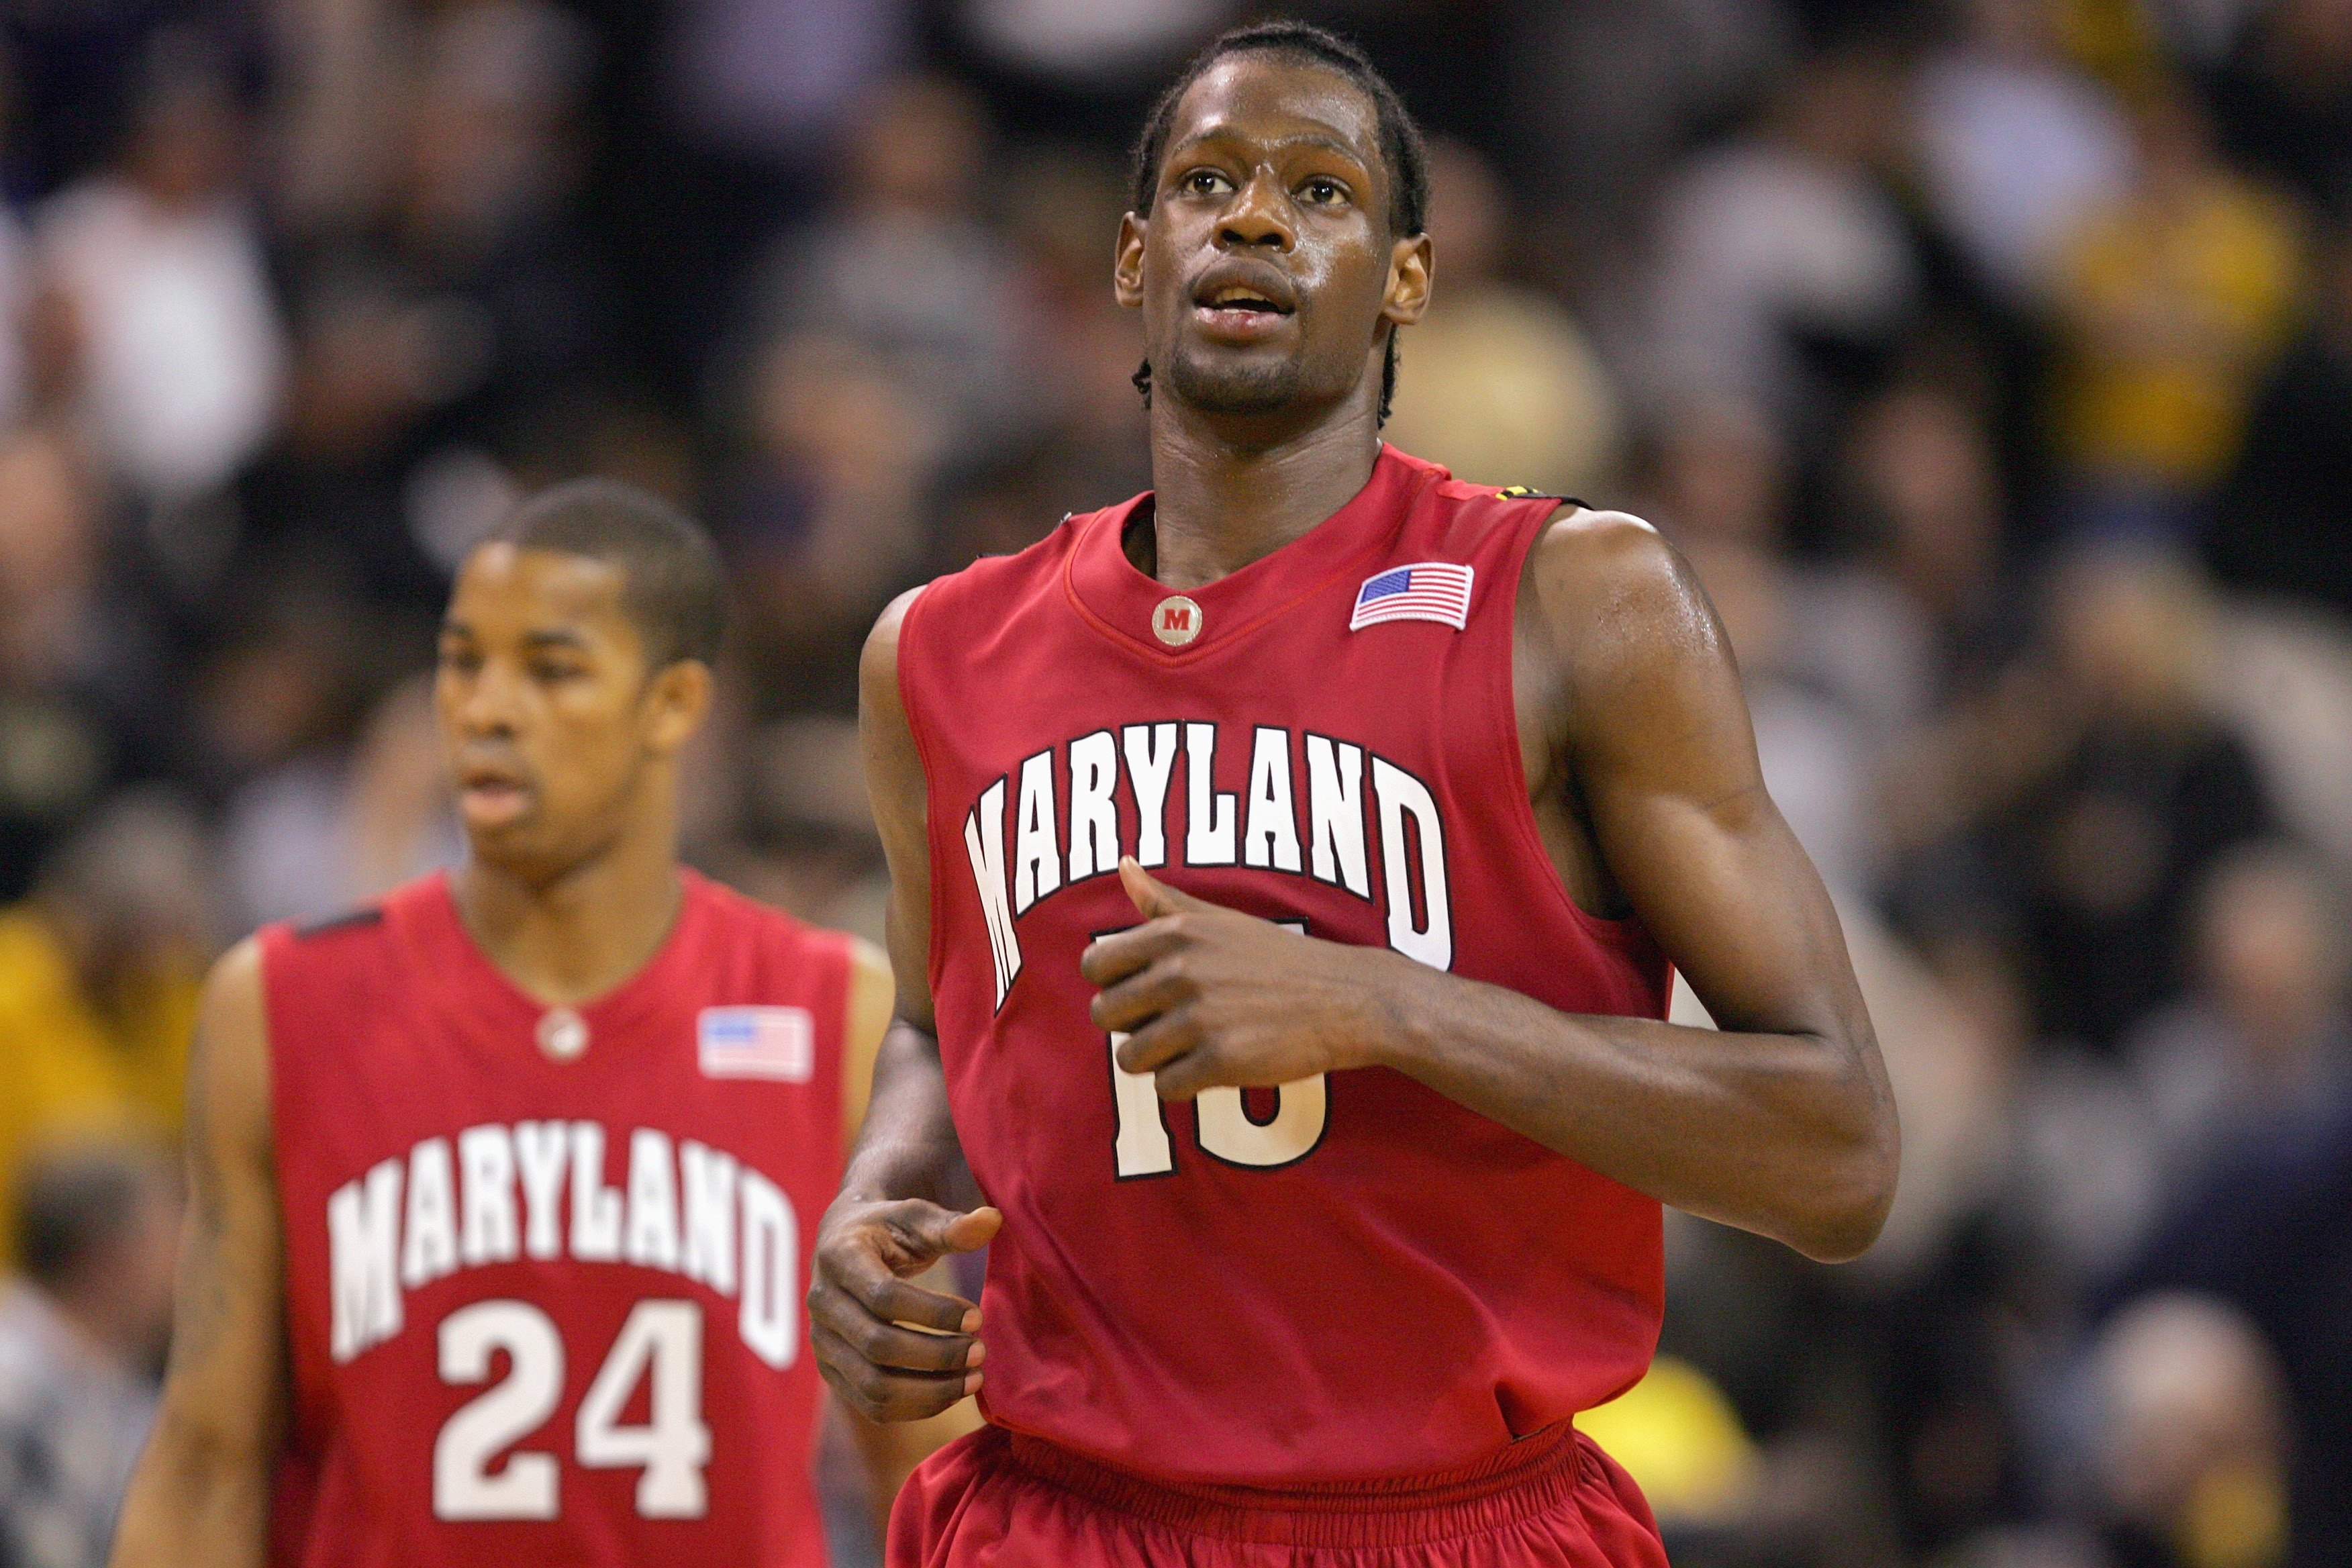 Who's the best shooting guard in Maryland basketball history?